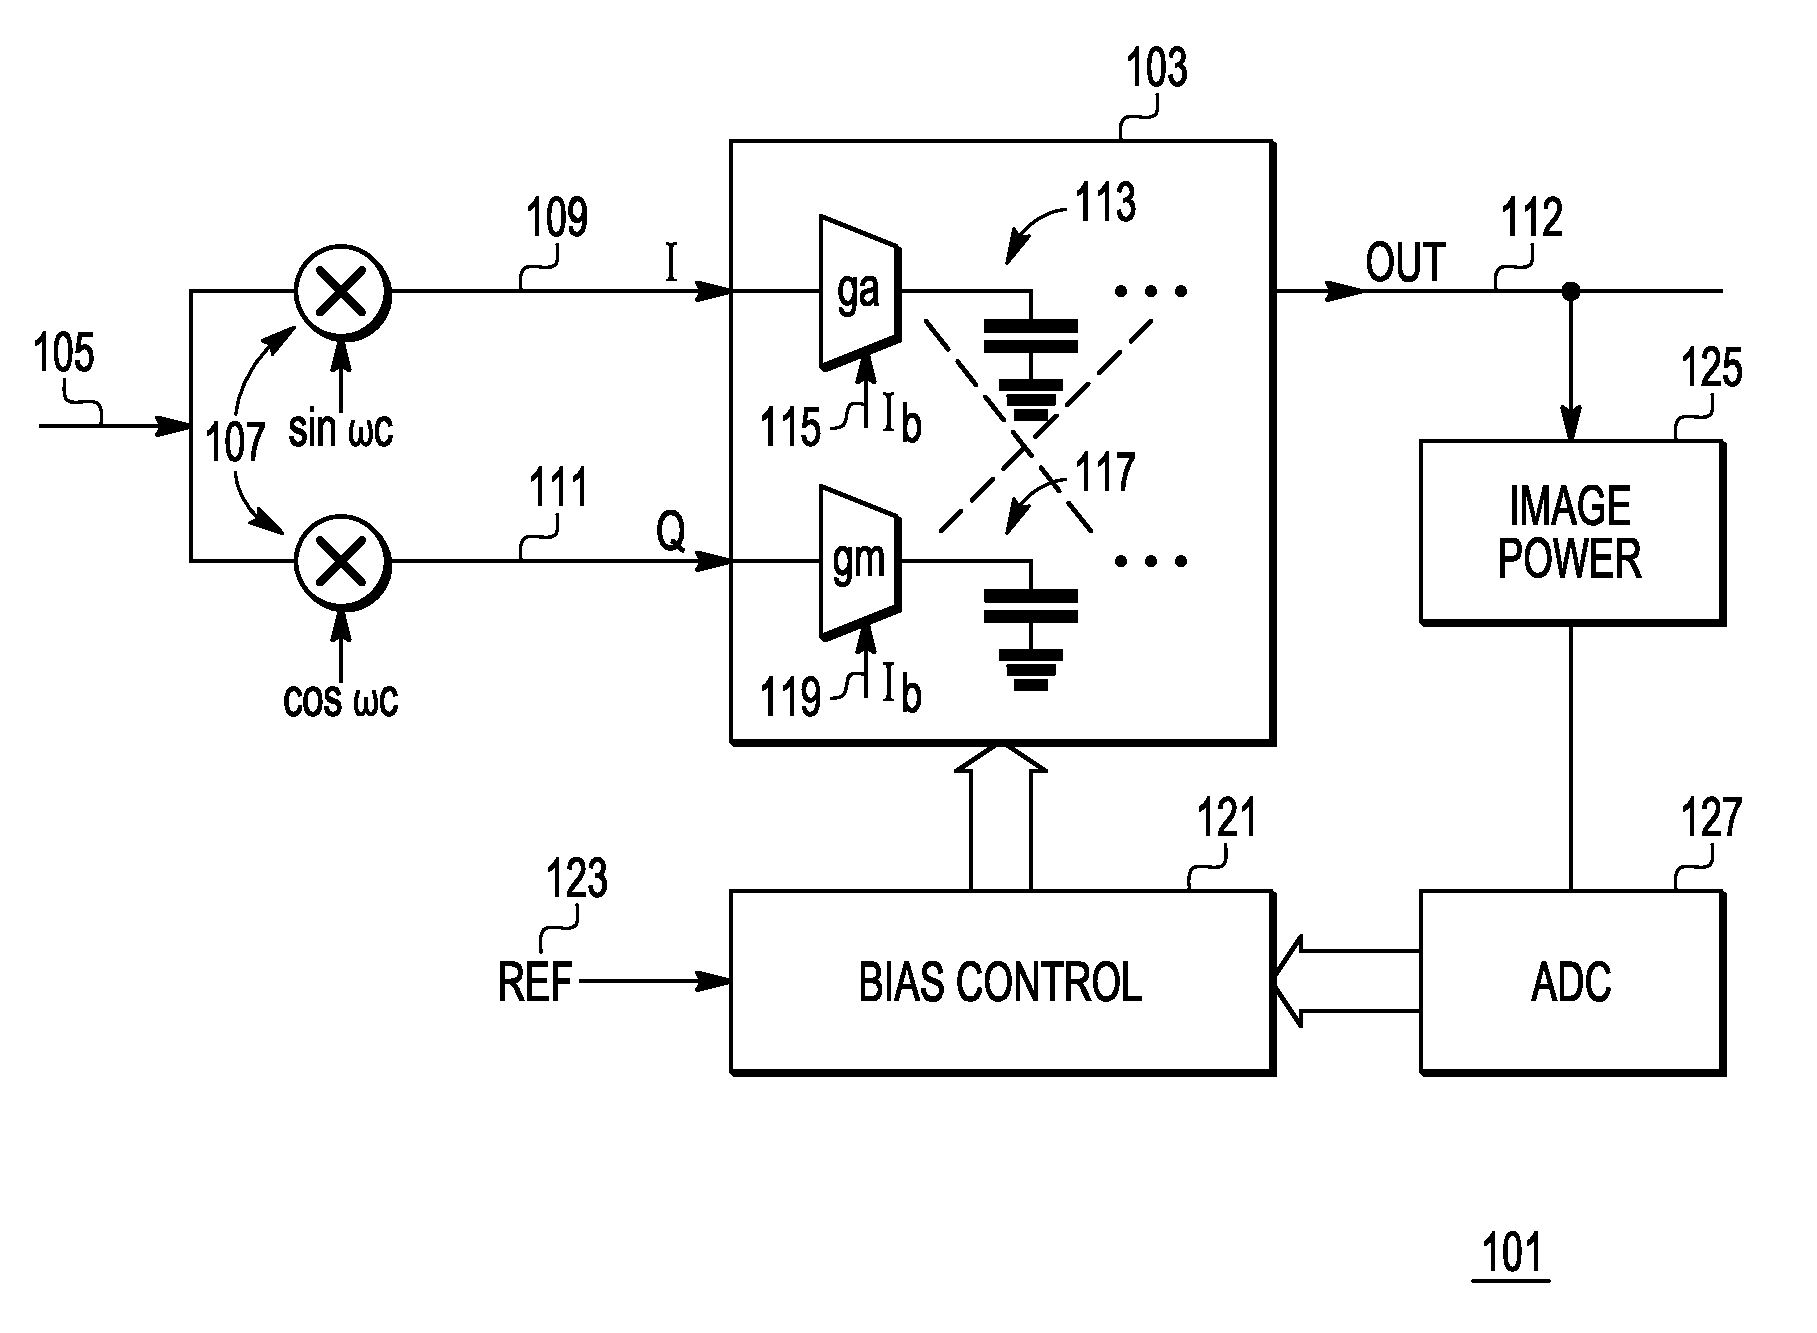 Image rejection for low IF receivers